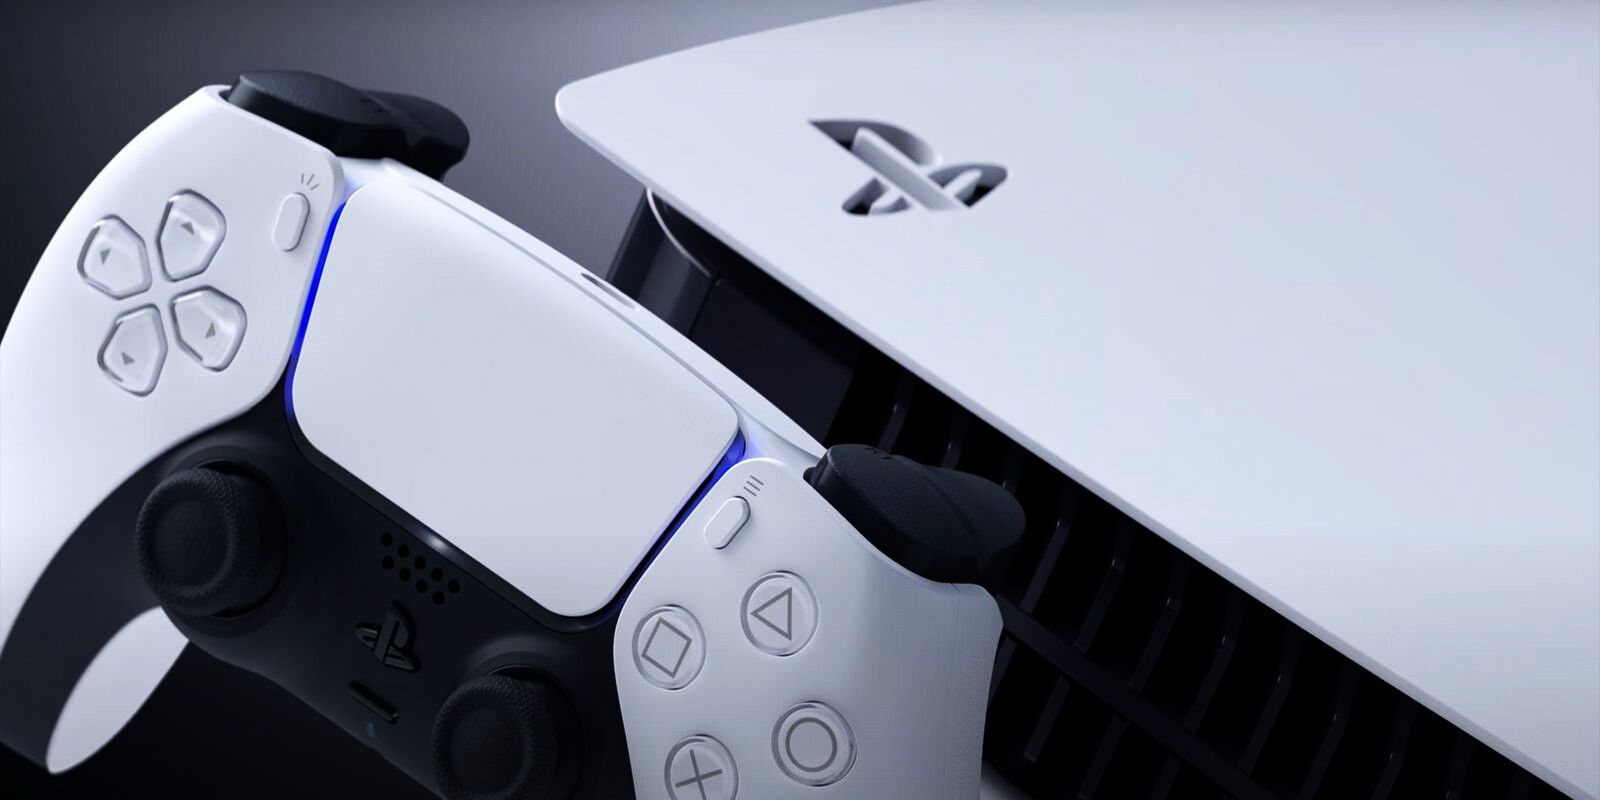 Promotional image of a PlayStation 5 console and controller.